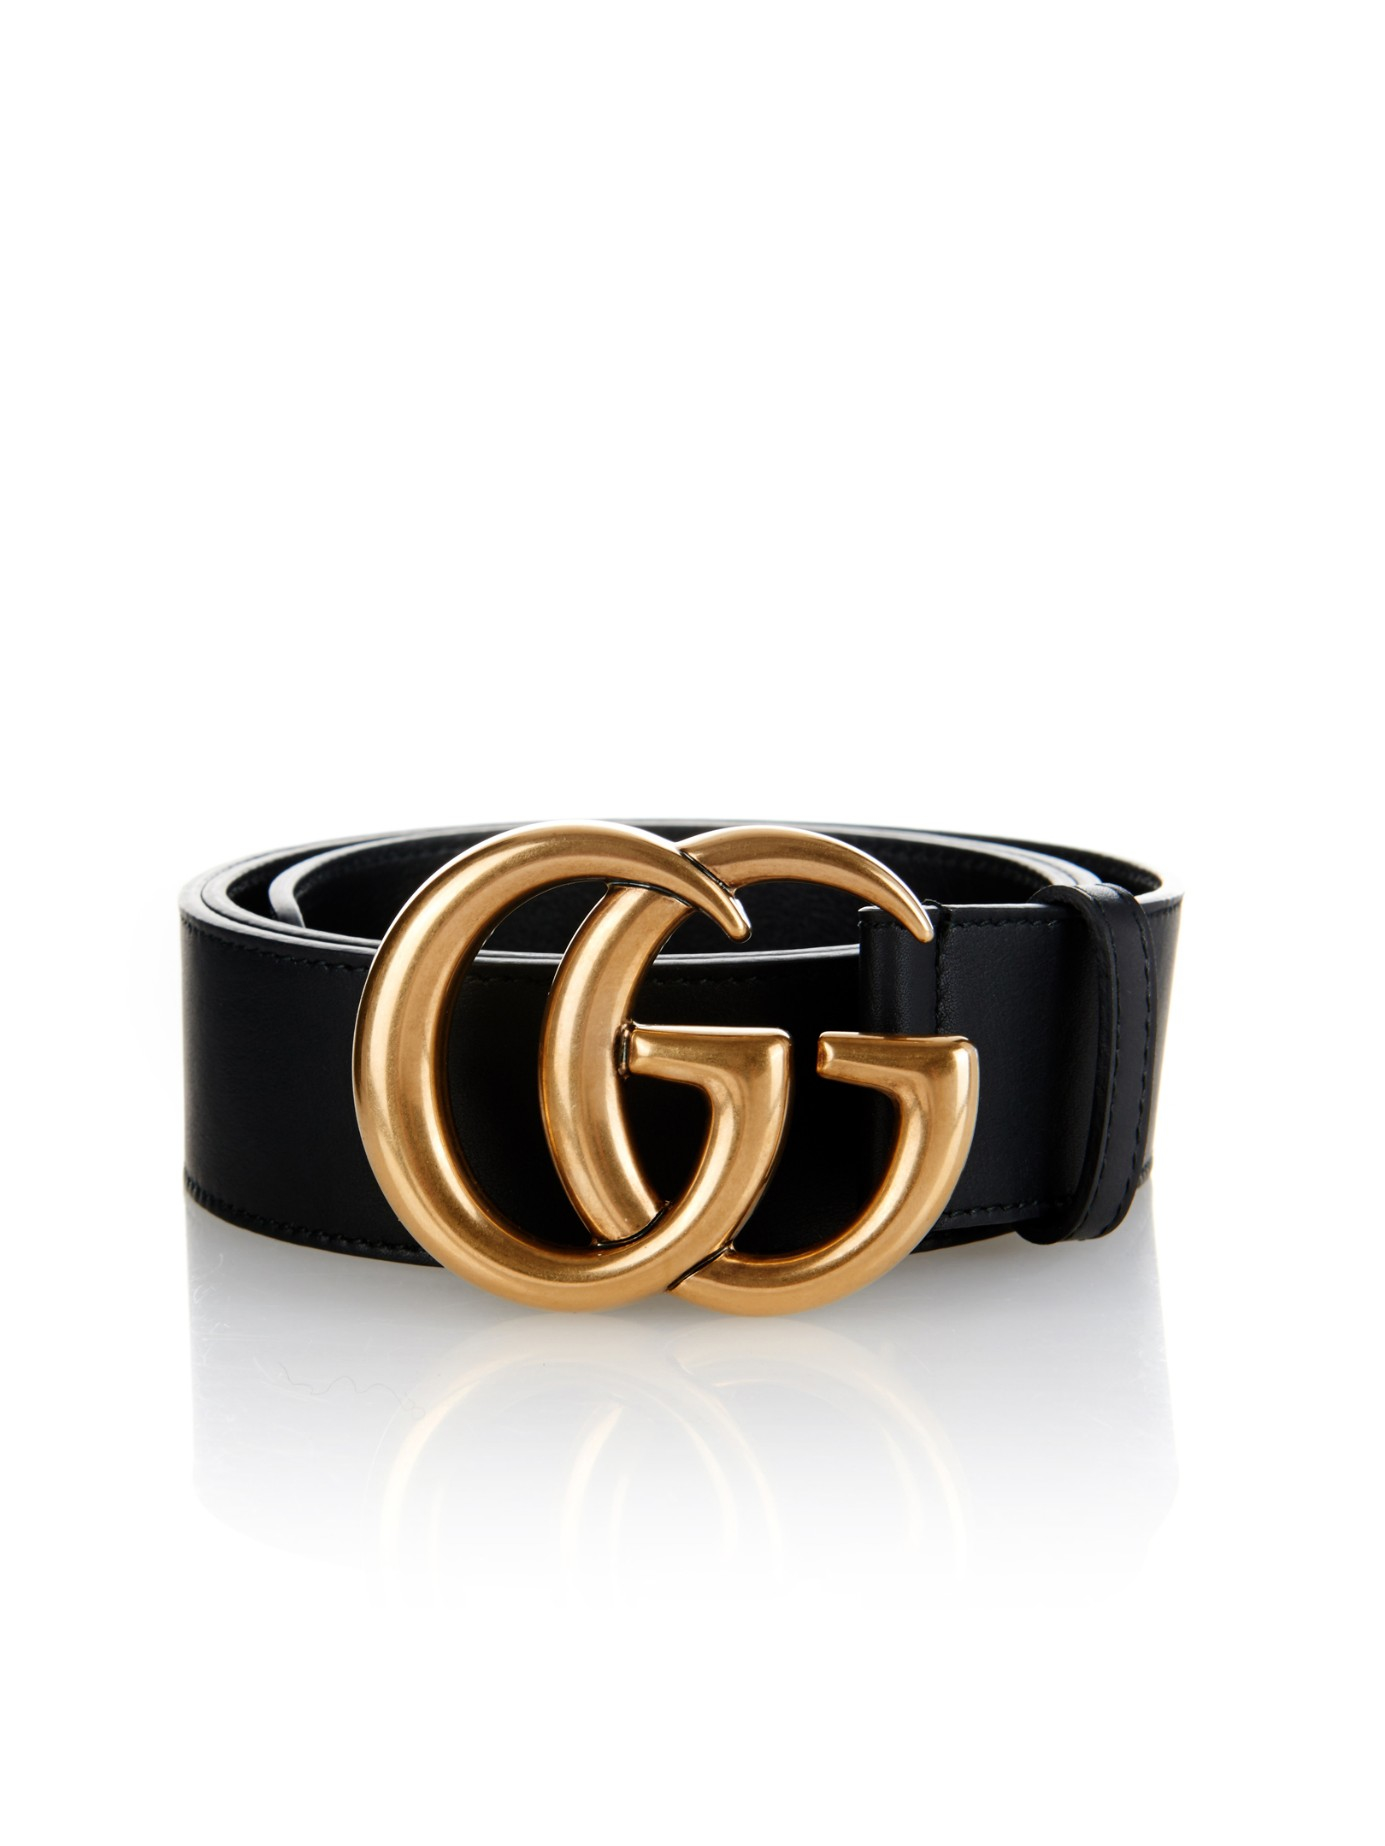 GUCCI BELT GOLD BUCKLE GG - BLACK (Sizes Available)